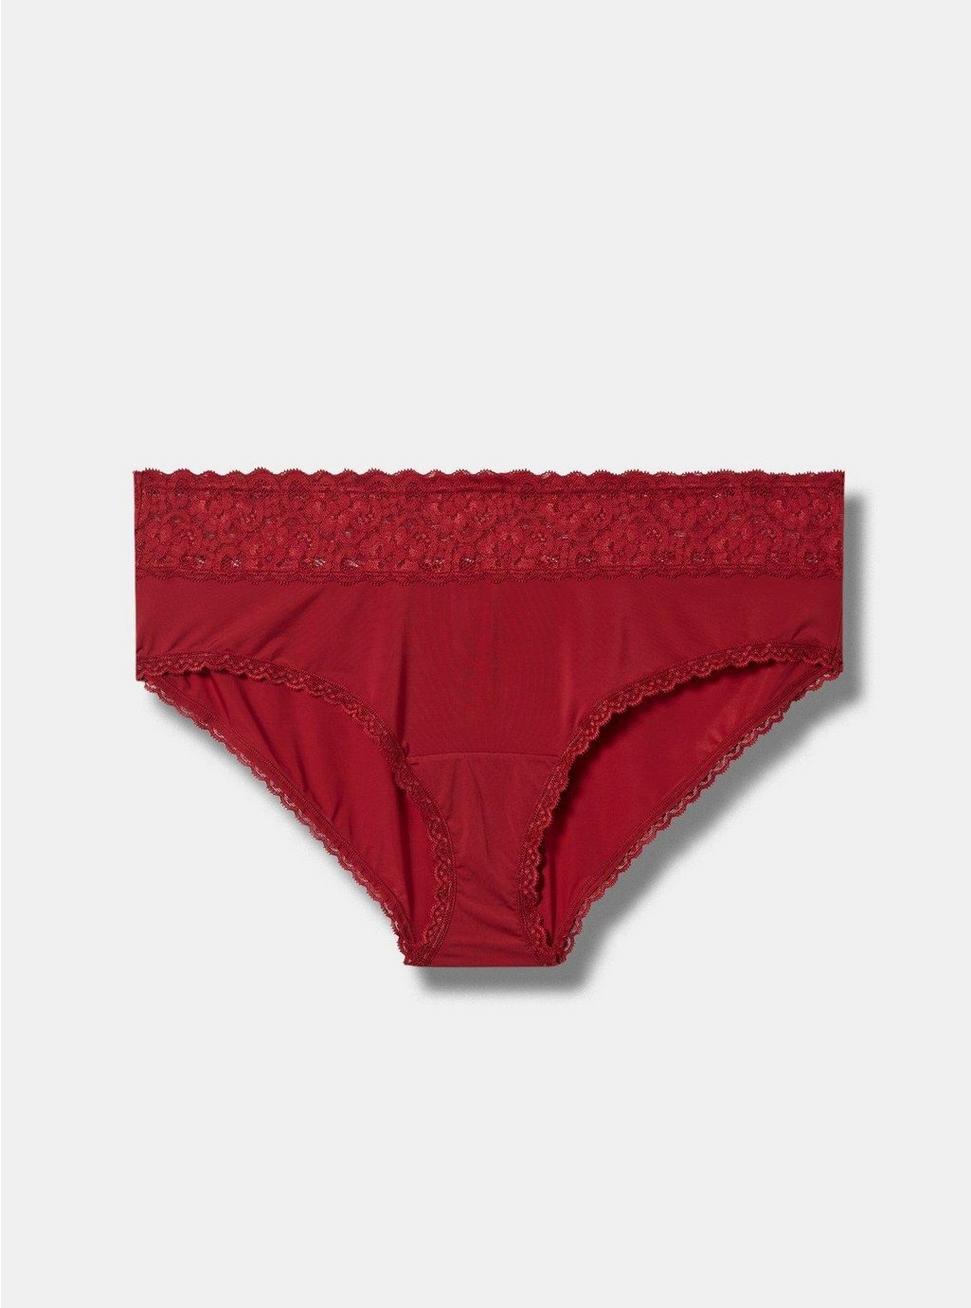 Second Skin Mid-Rise Hipster Lace Trim Panty, RHUBARB, hi-res